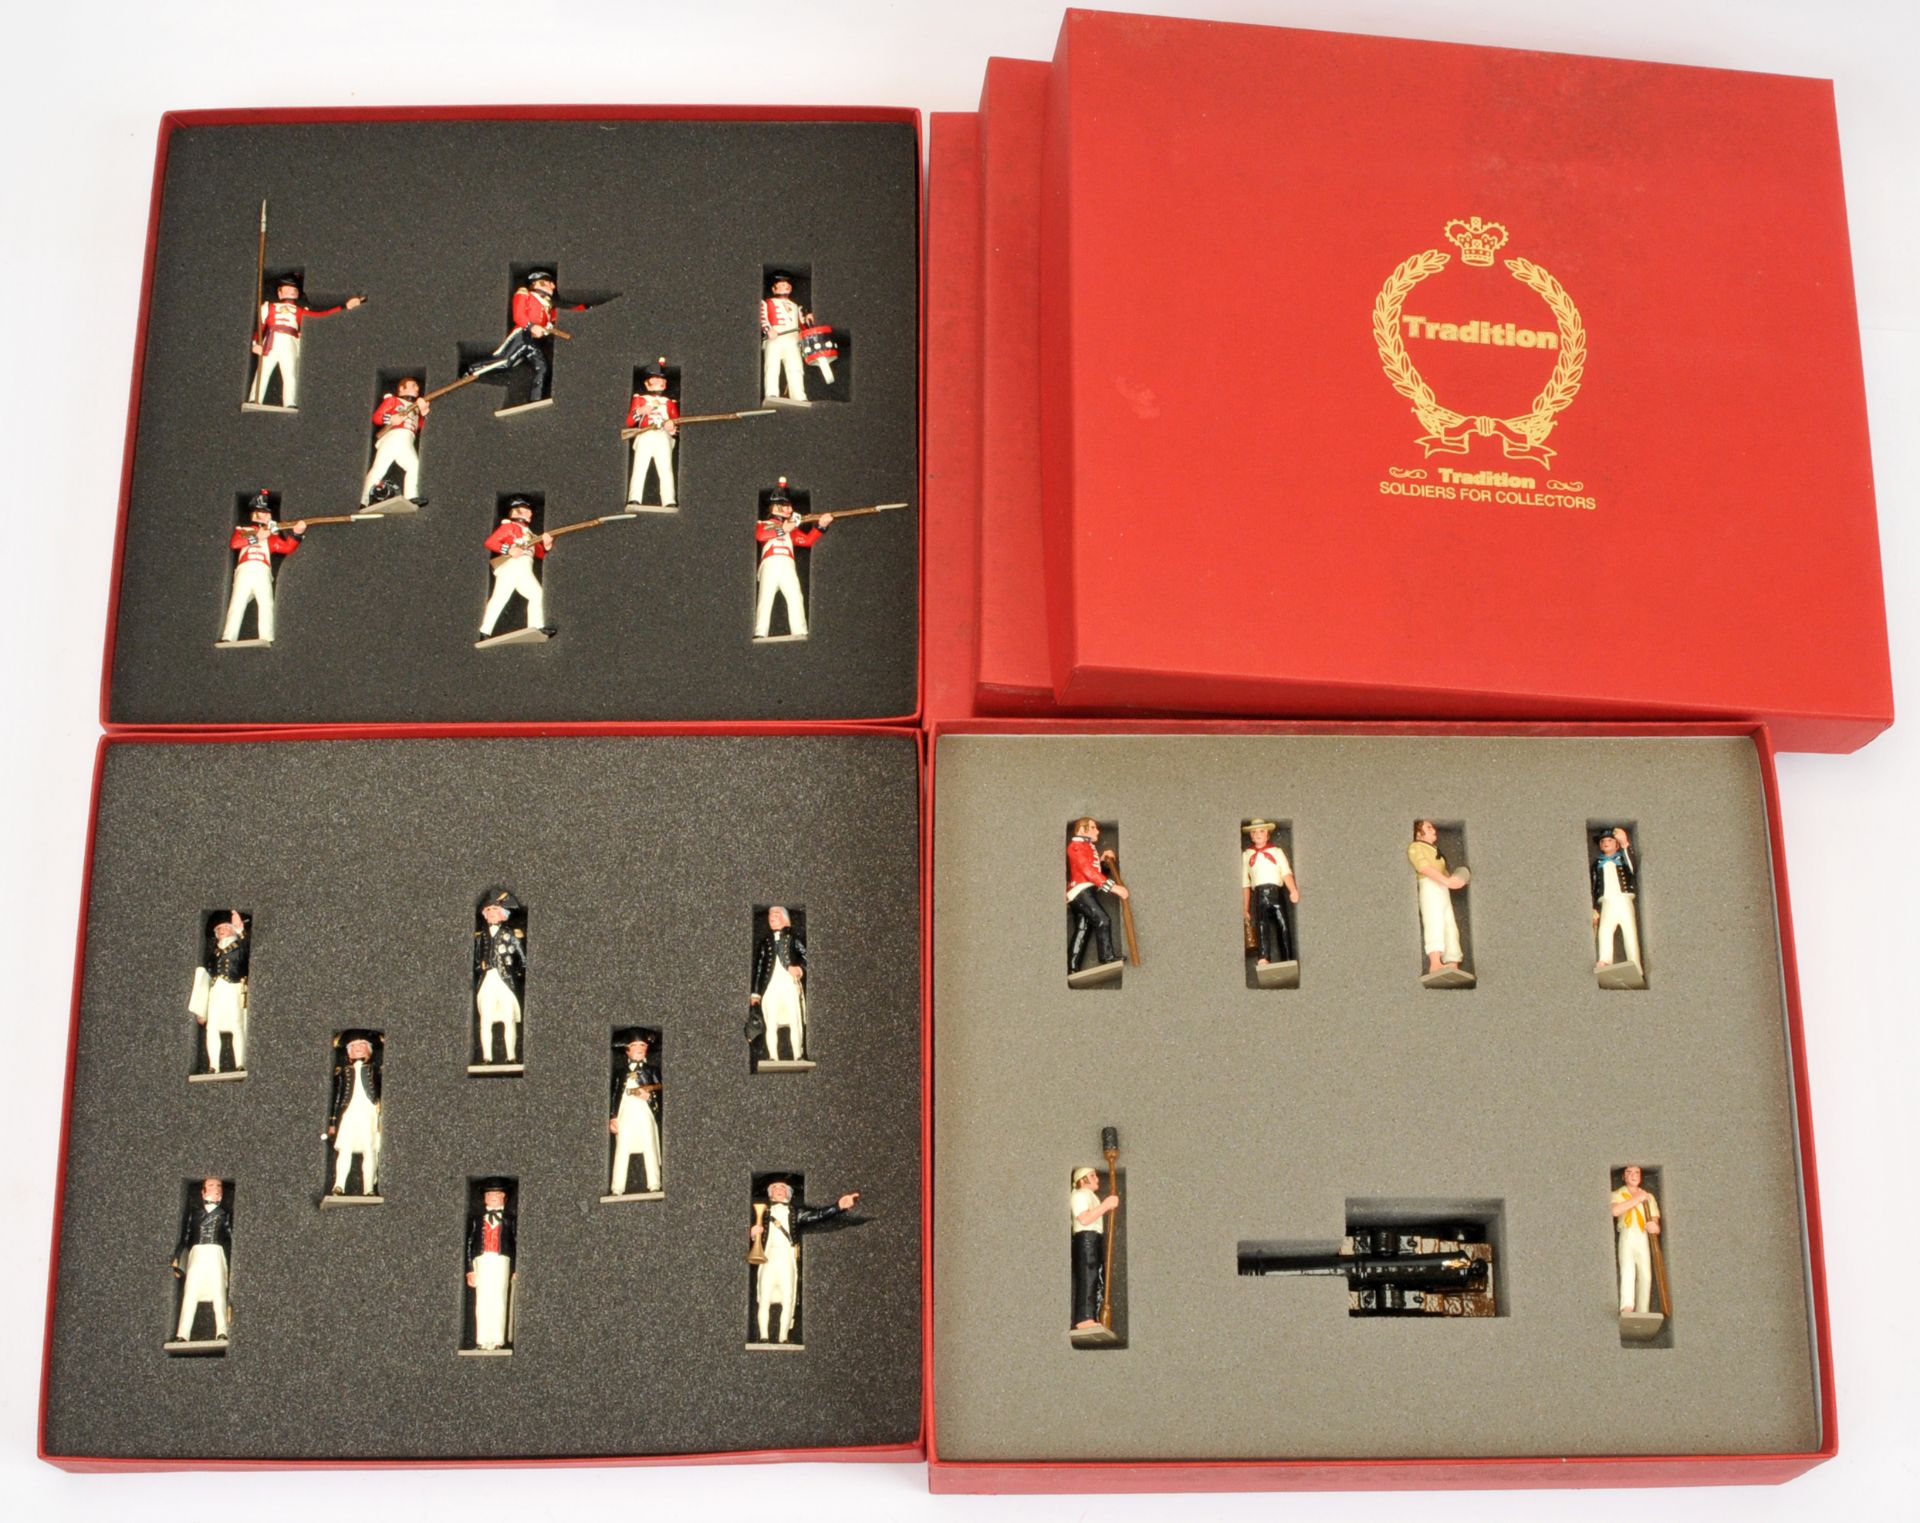 Tradition - Napoleonic Wars Range - A Group of Boxed Metal Toy Soldier Sets